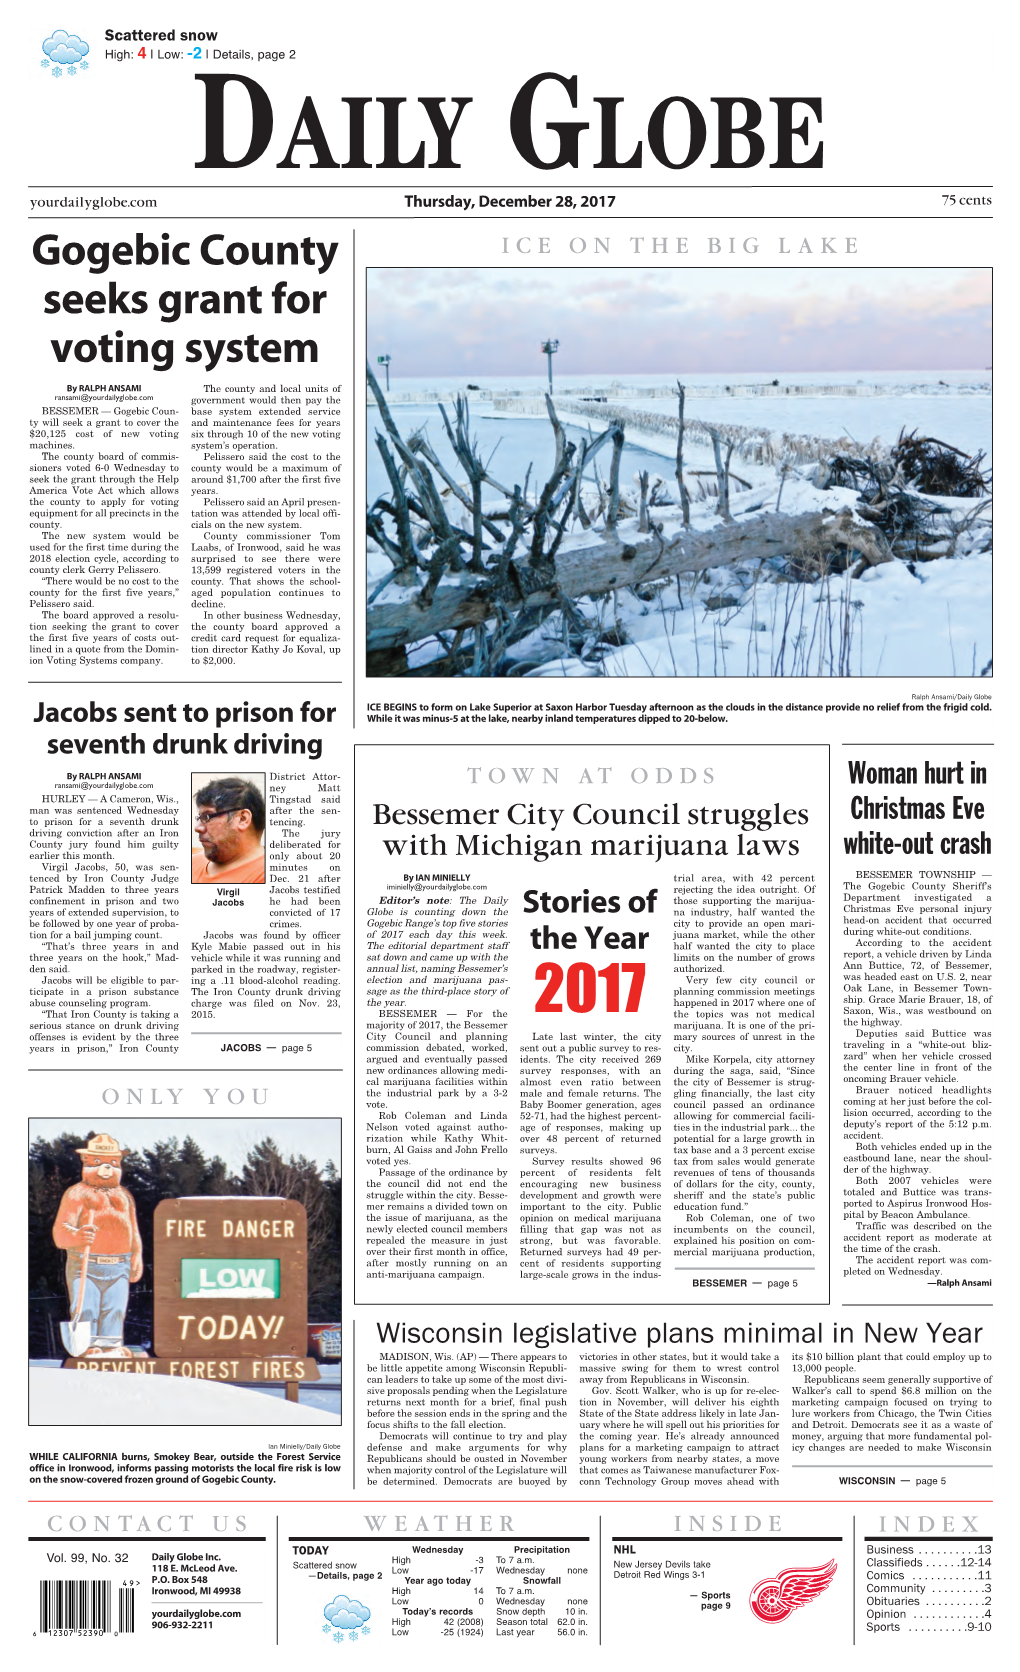 Gogebic County Seeks Grant for Voting System